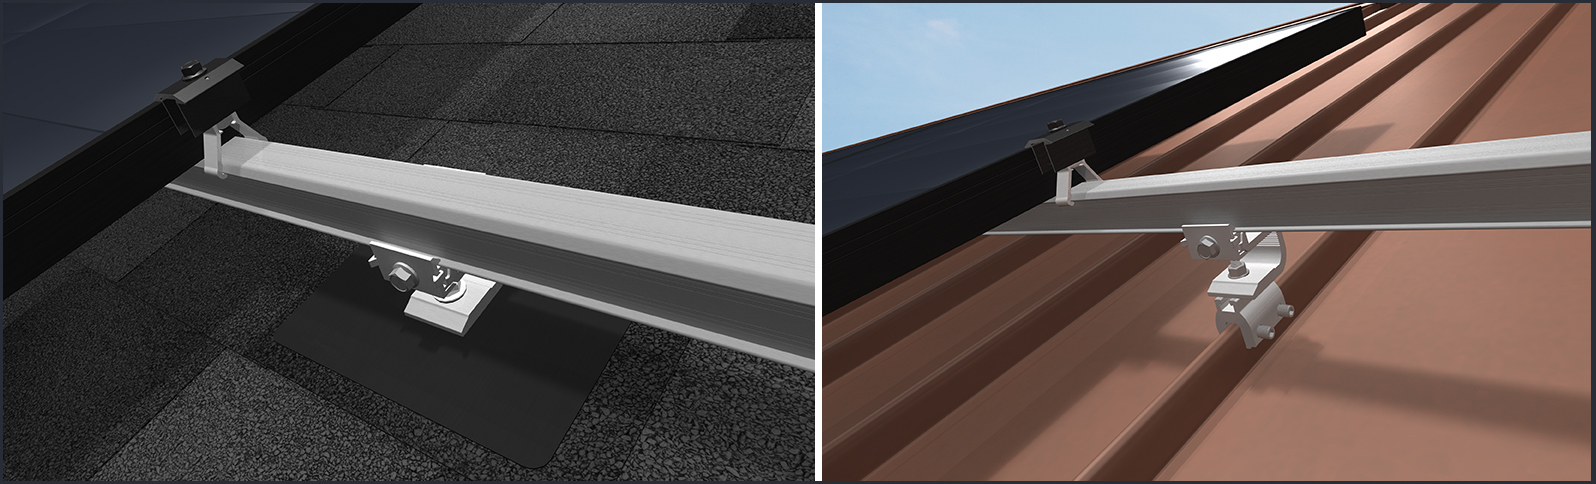 ClickFit installed on shingles and on standing seam